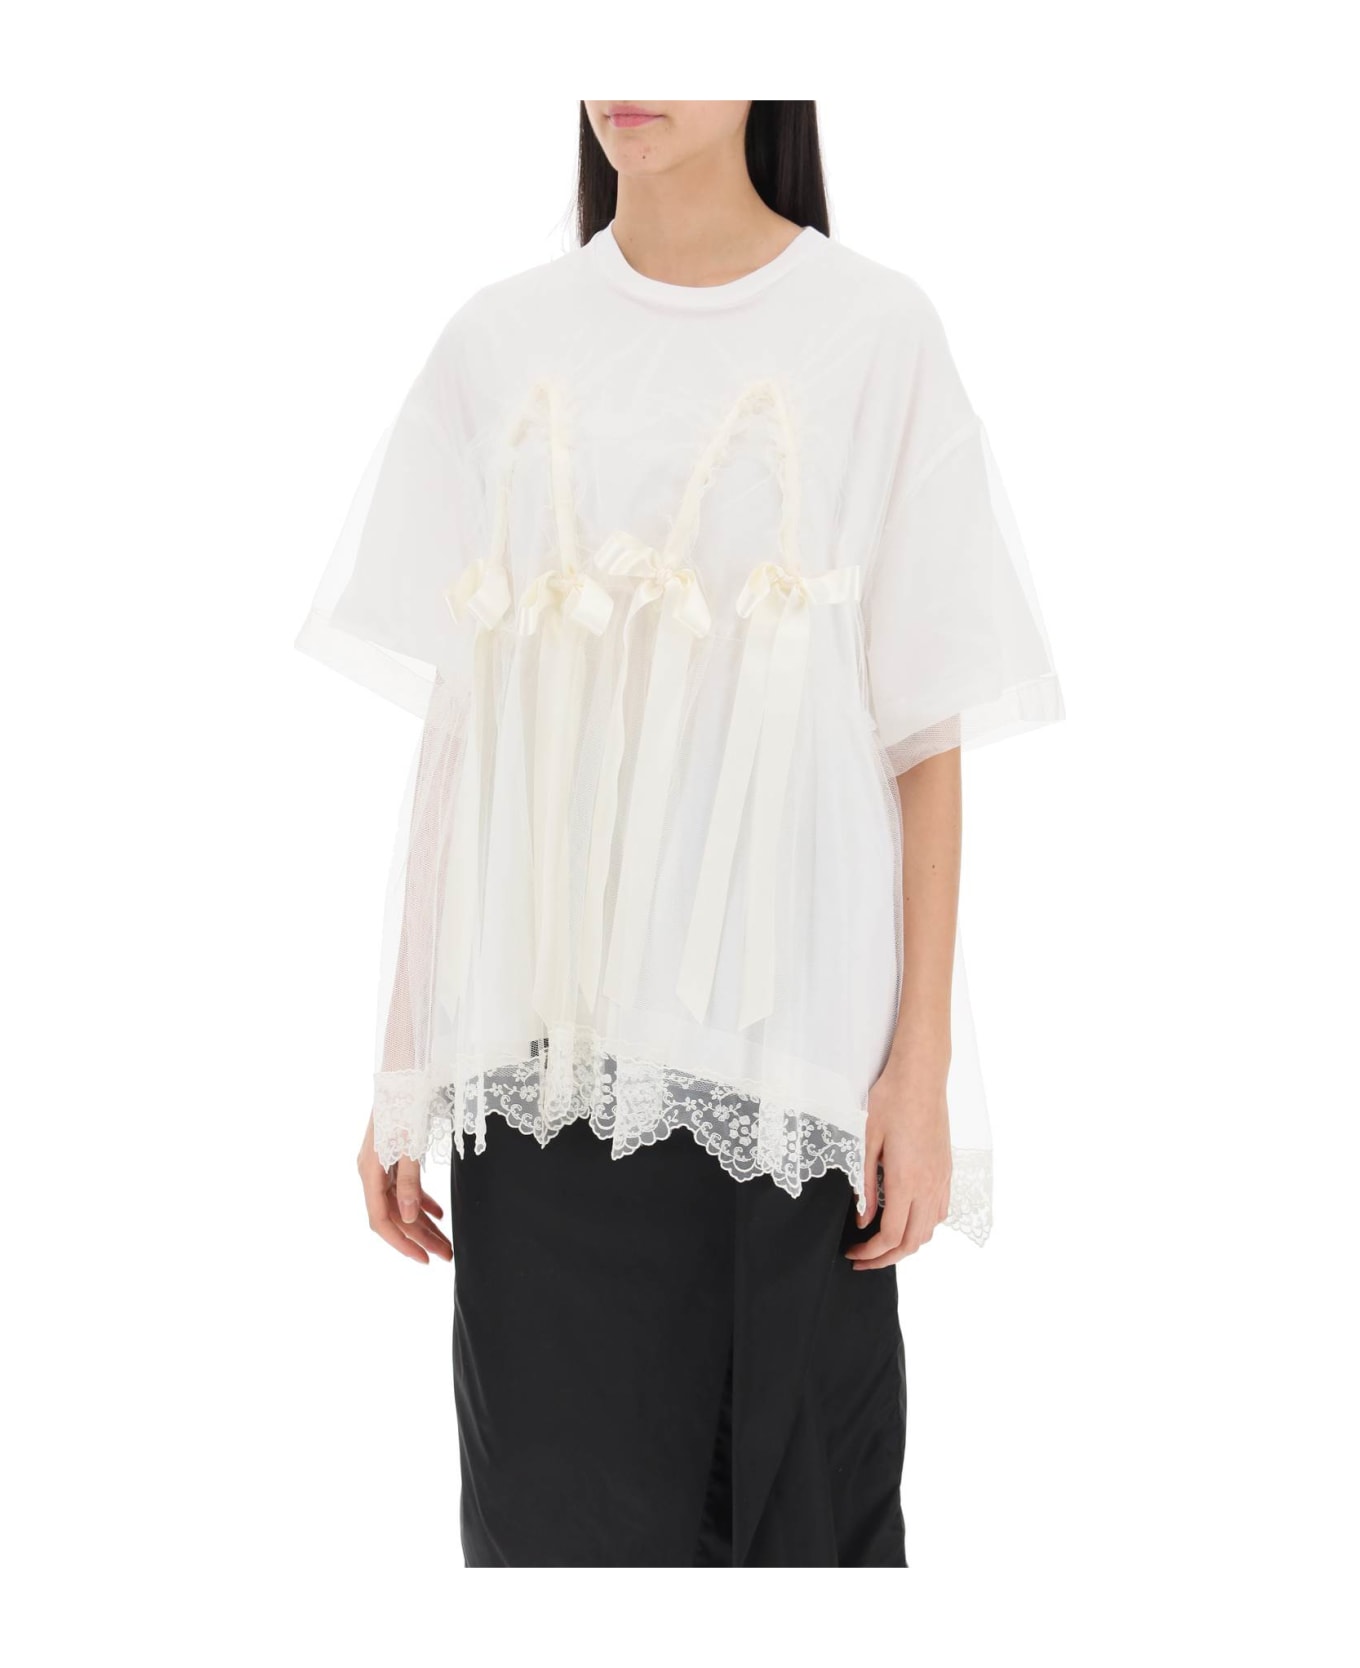 Simone Rocha Tulle Top With Lace And Bows - WHITE (White)